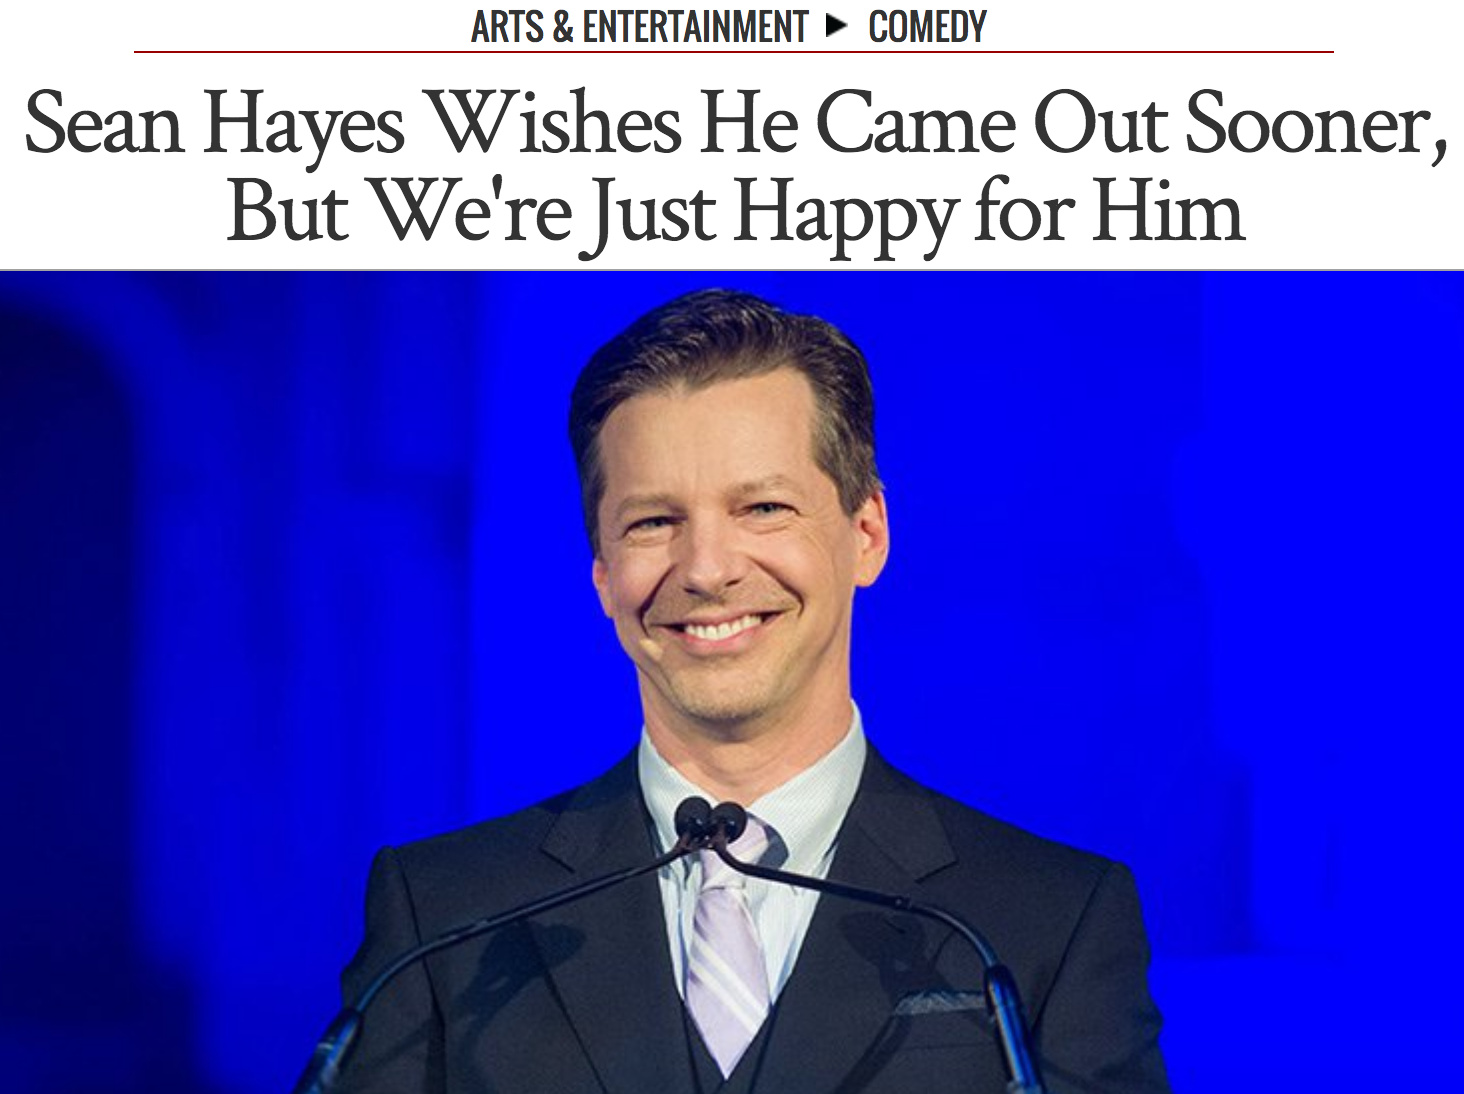 Sean Hayes accepts the Outfest Trailblazer Award